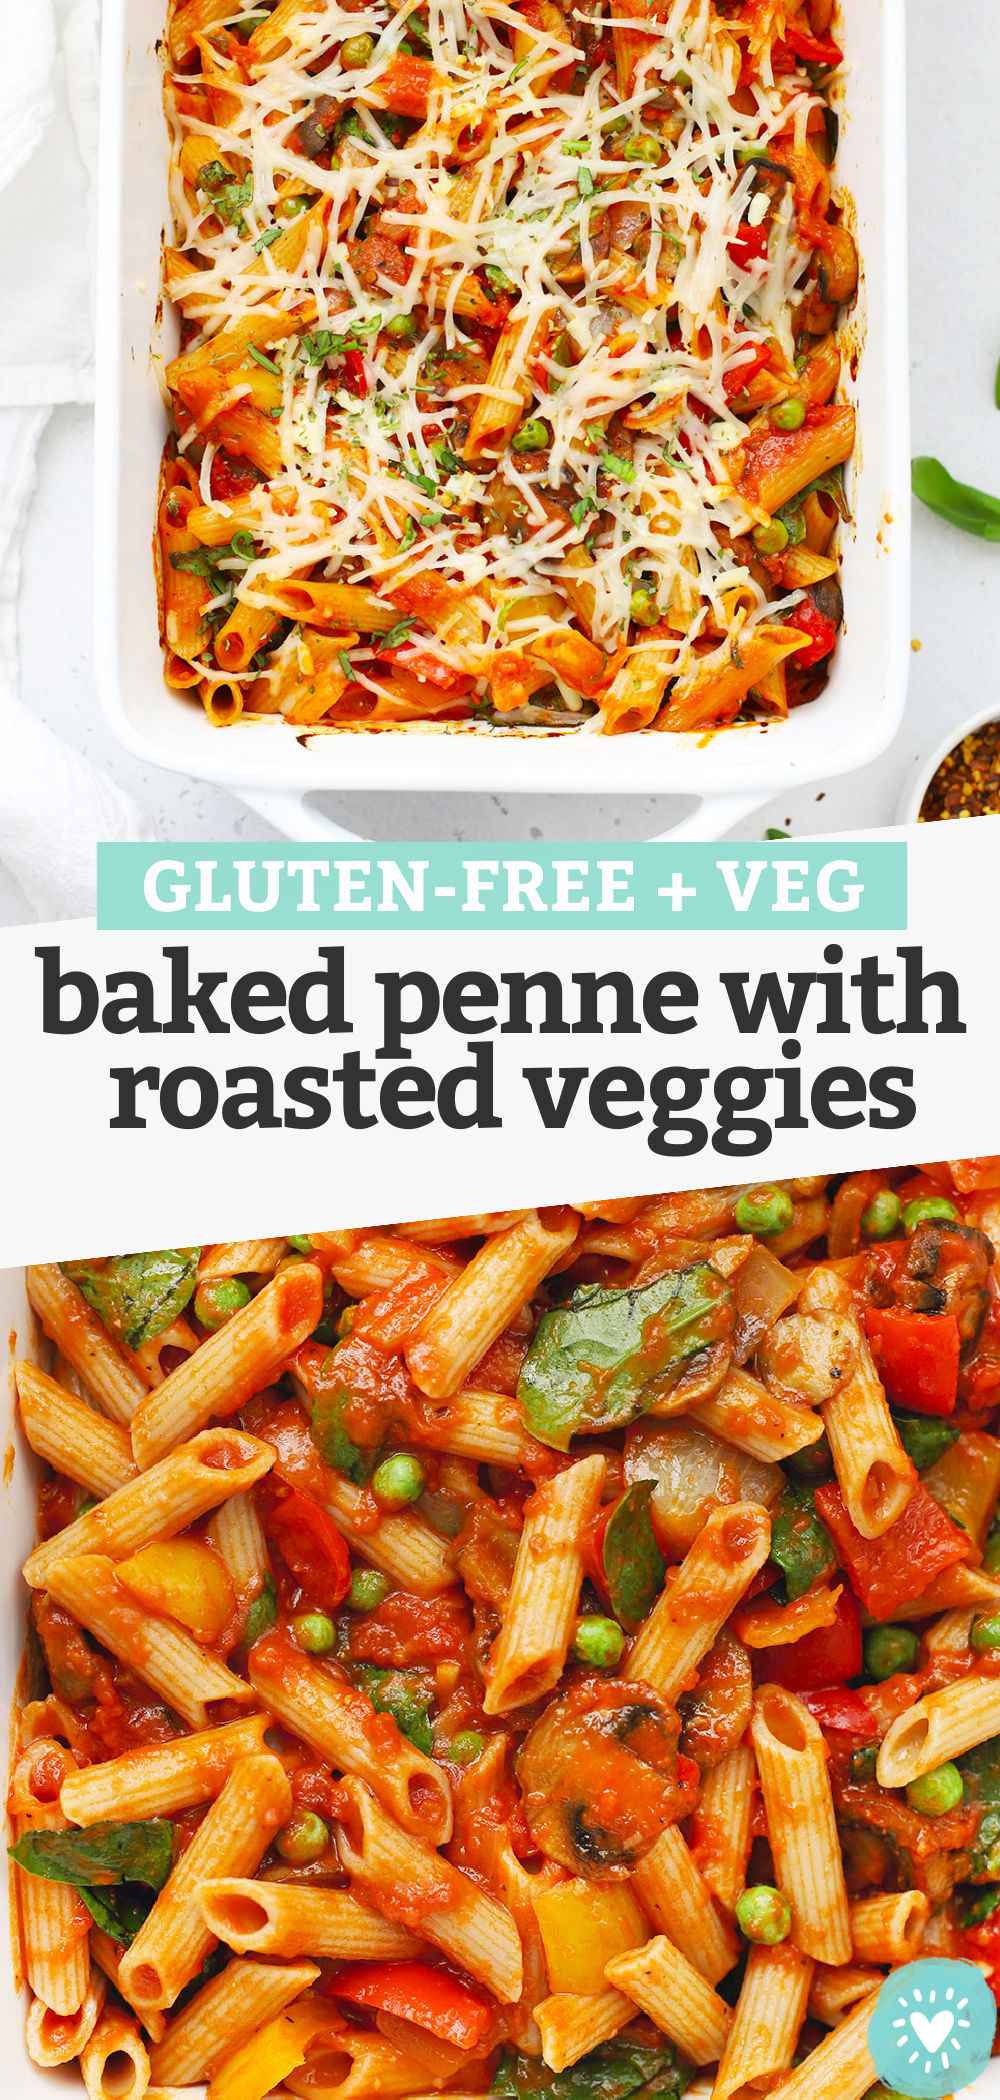 Collage of images of gluten free baked penne with text overlay that reads "Gluten-Free + Veg Baked Penne with Roasted Veggies"